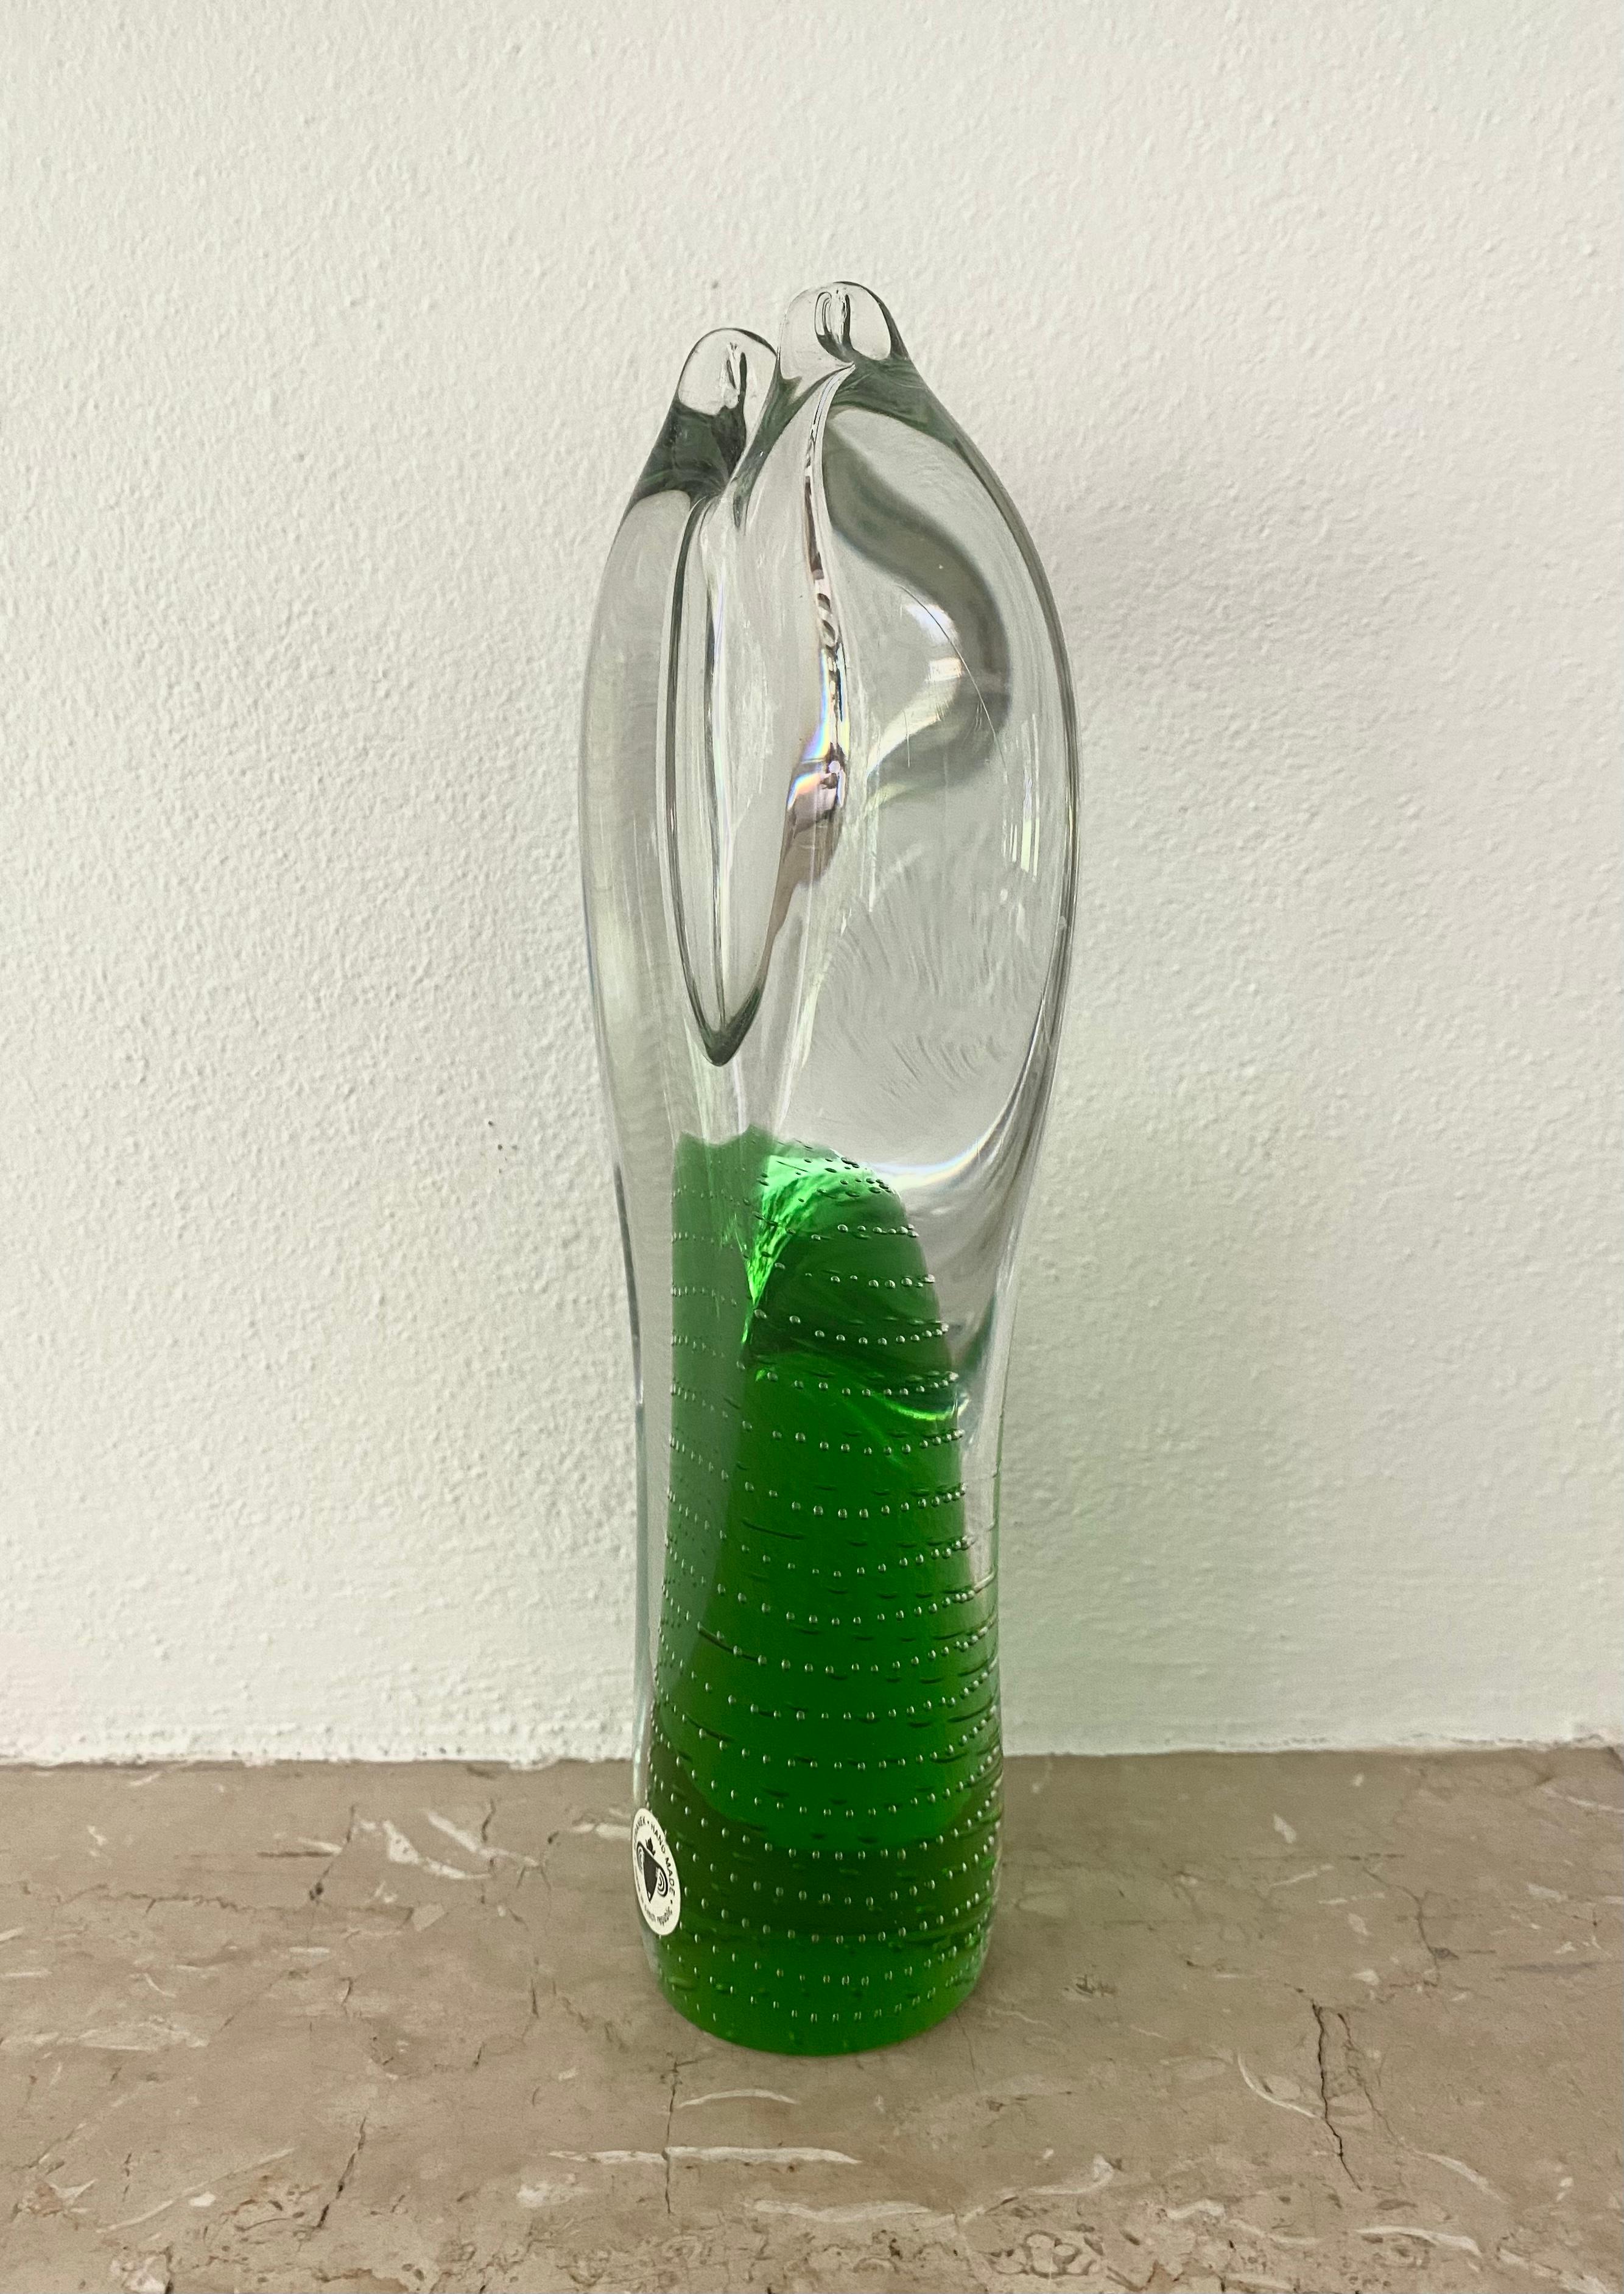 Elegant clear and green bubbleglass vase, which was designed by Pavel Juda in 1985. This Handmade item remains in wonderful condition with only minimal wear, No chips and signed with label. Feel free to make us a reasonable offer.